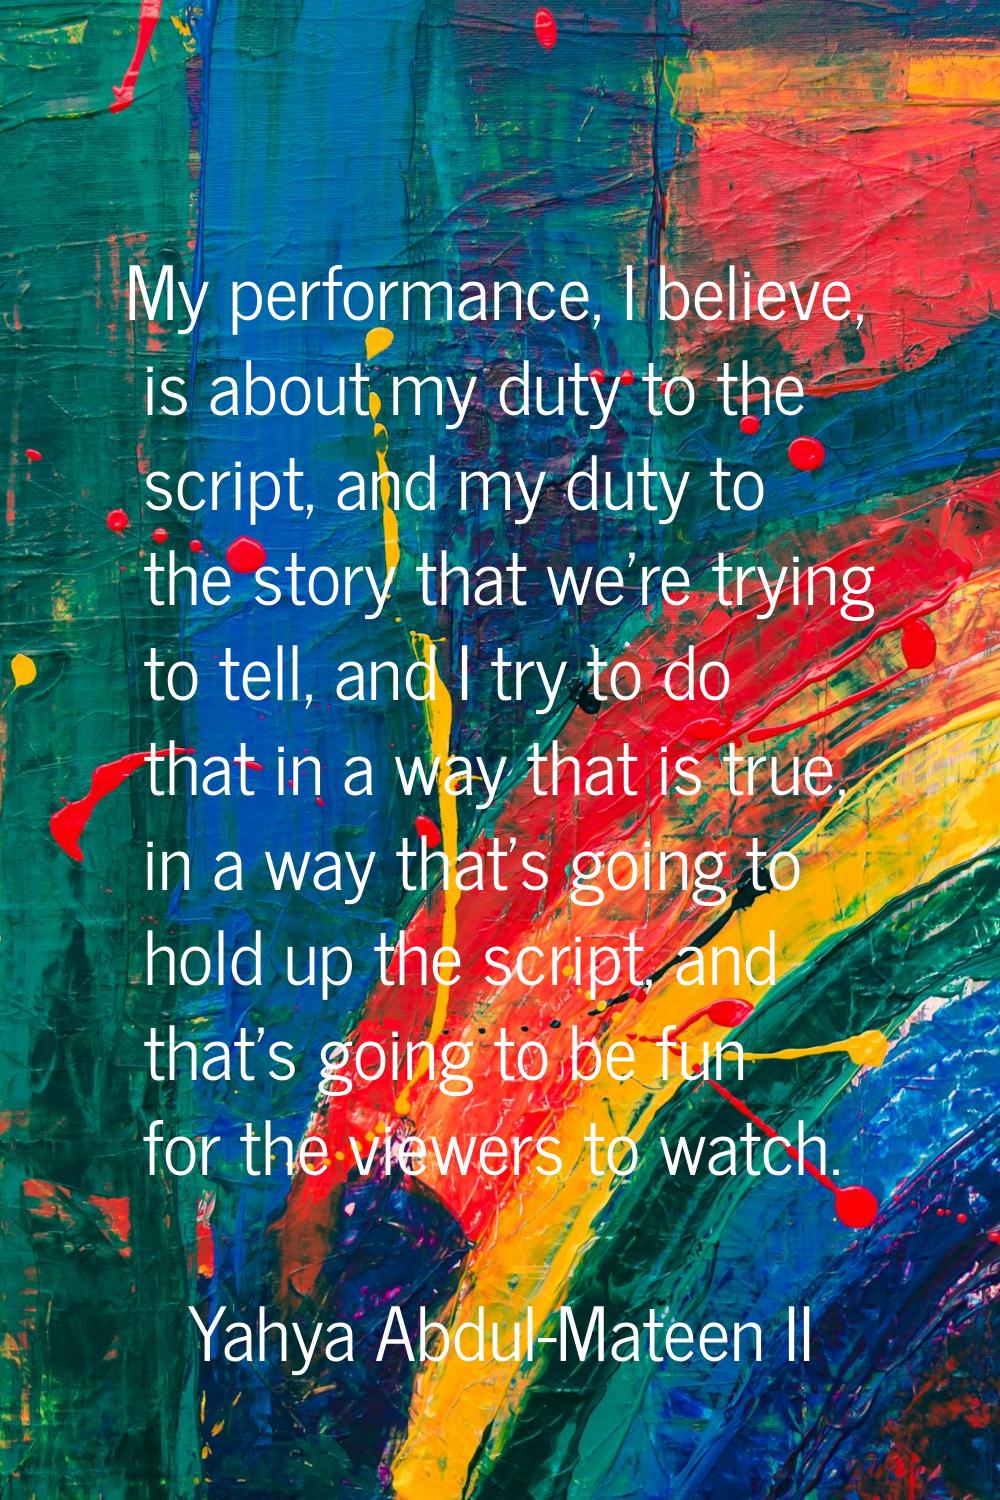 My performance, I believe, is about my duty to the script, and my duty to the story that we're tryi